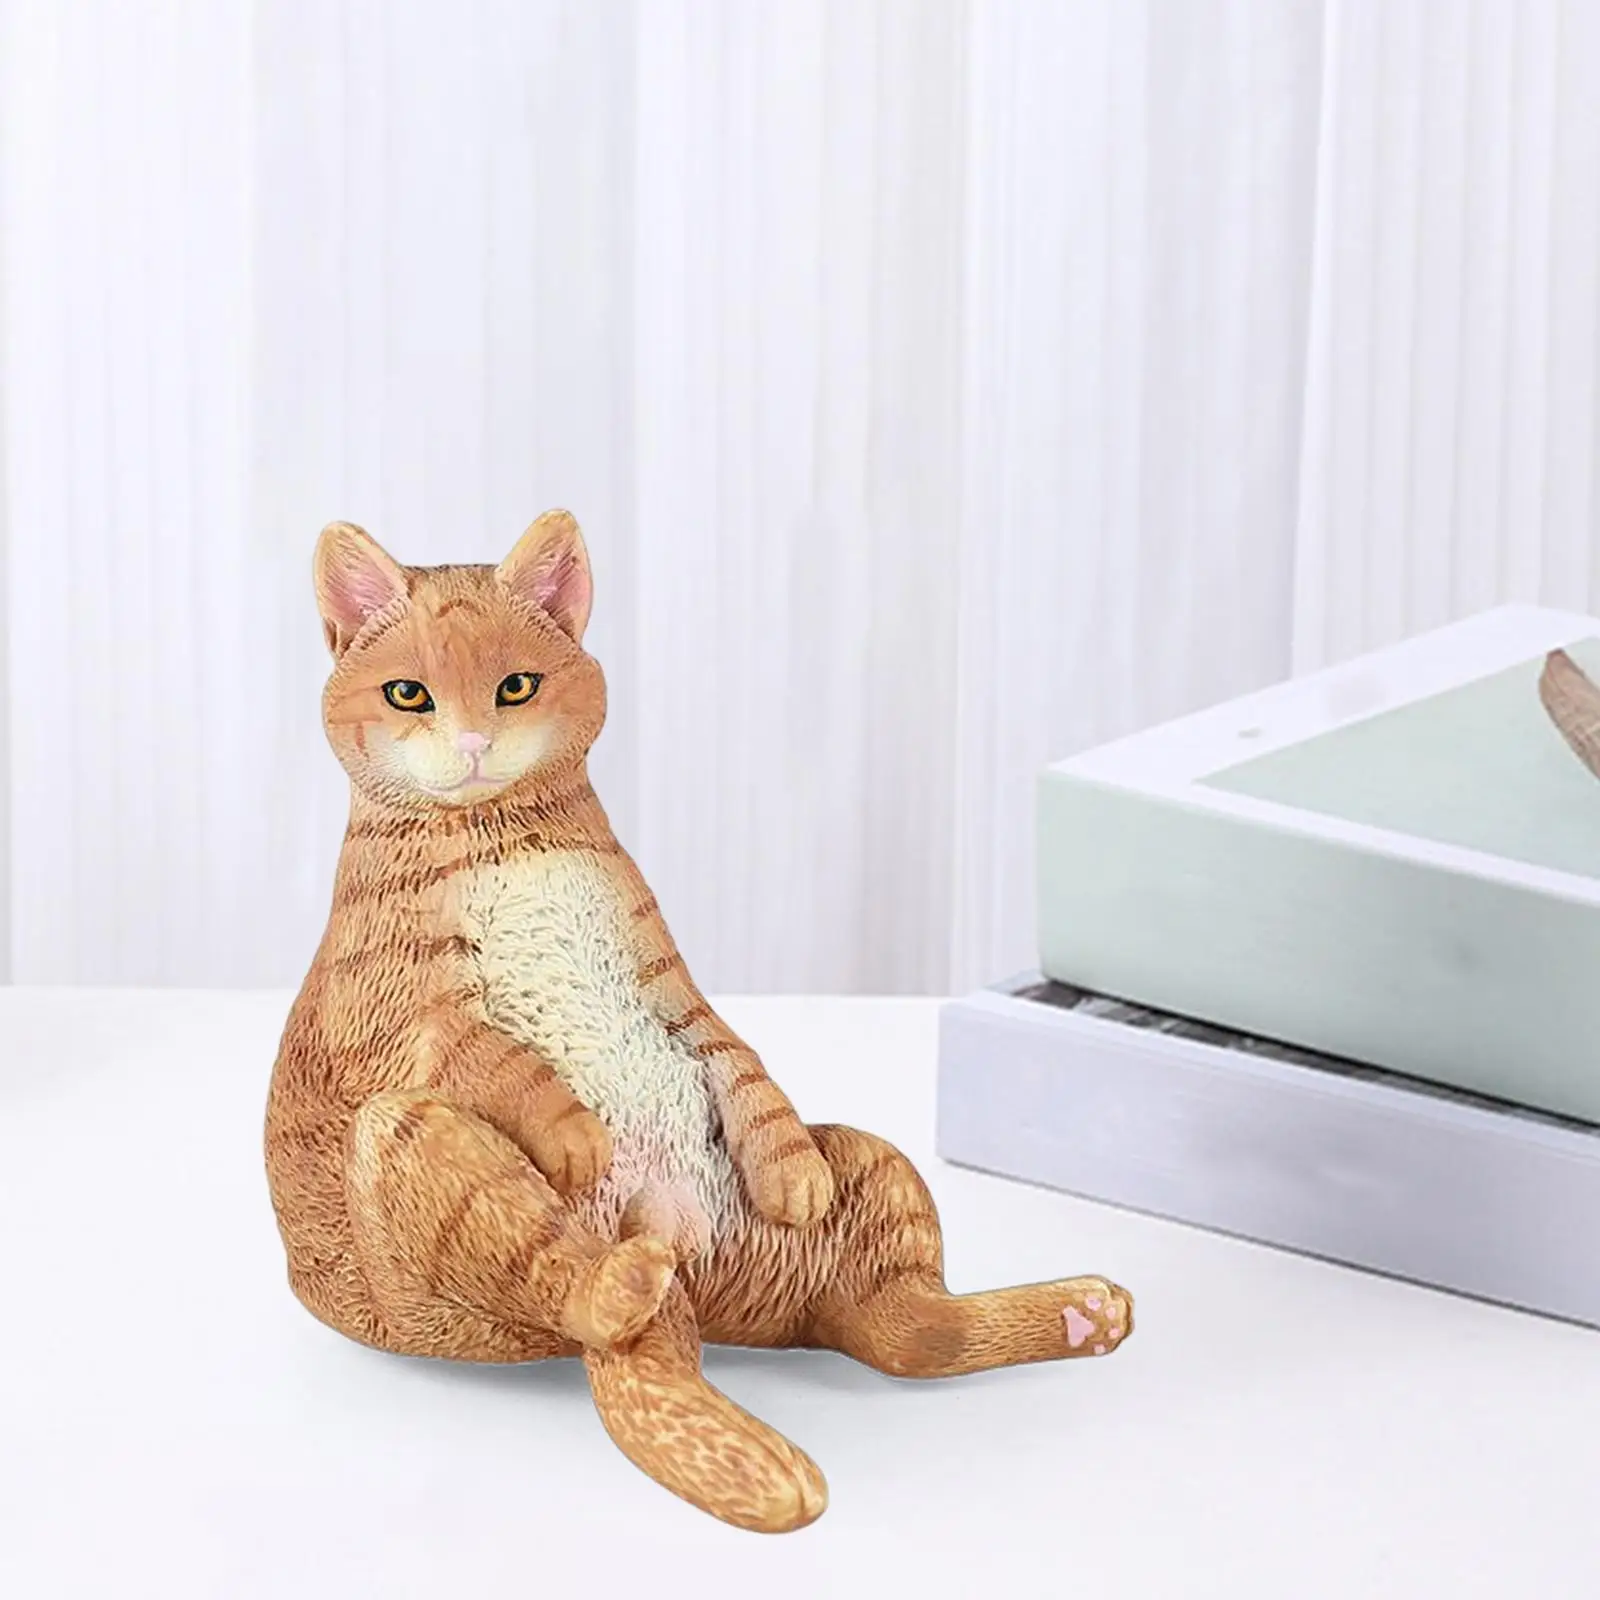 Miniature Cat Figure Animal Cat Characters Toys Educational Toys for Kids Children Figurine for Desktop Decor Holiday Gifts